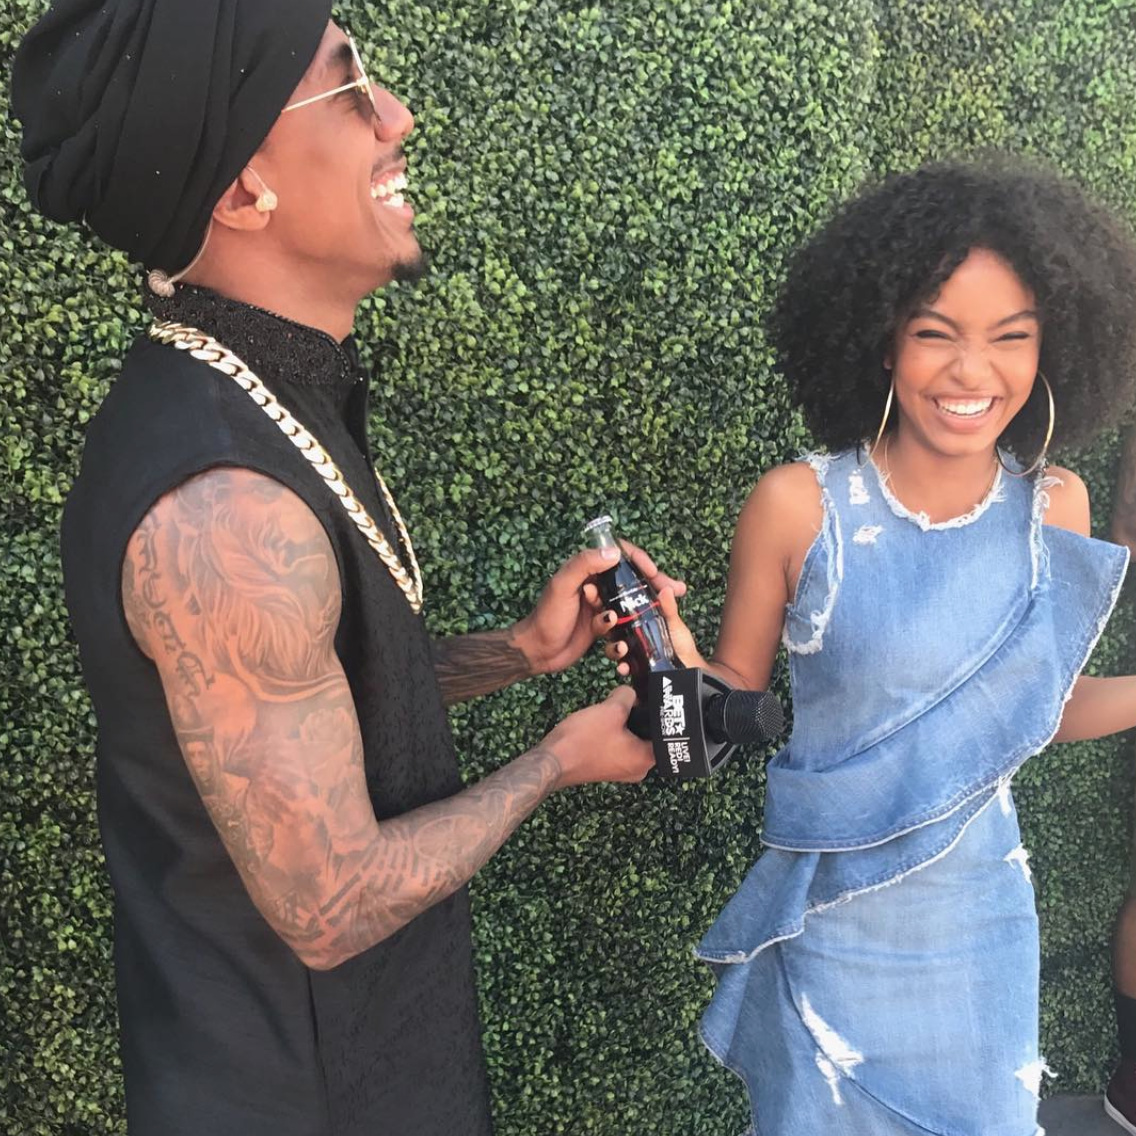 Celebrities Take To Instagram To Celebrate The BET Awards
